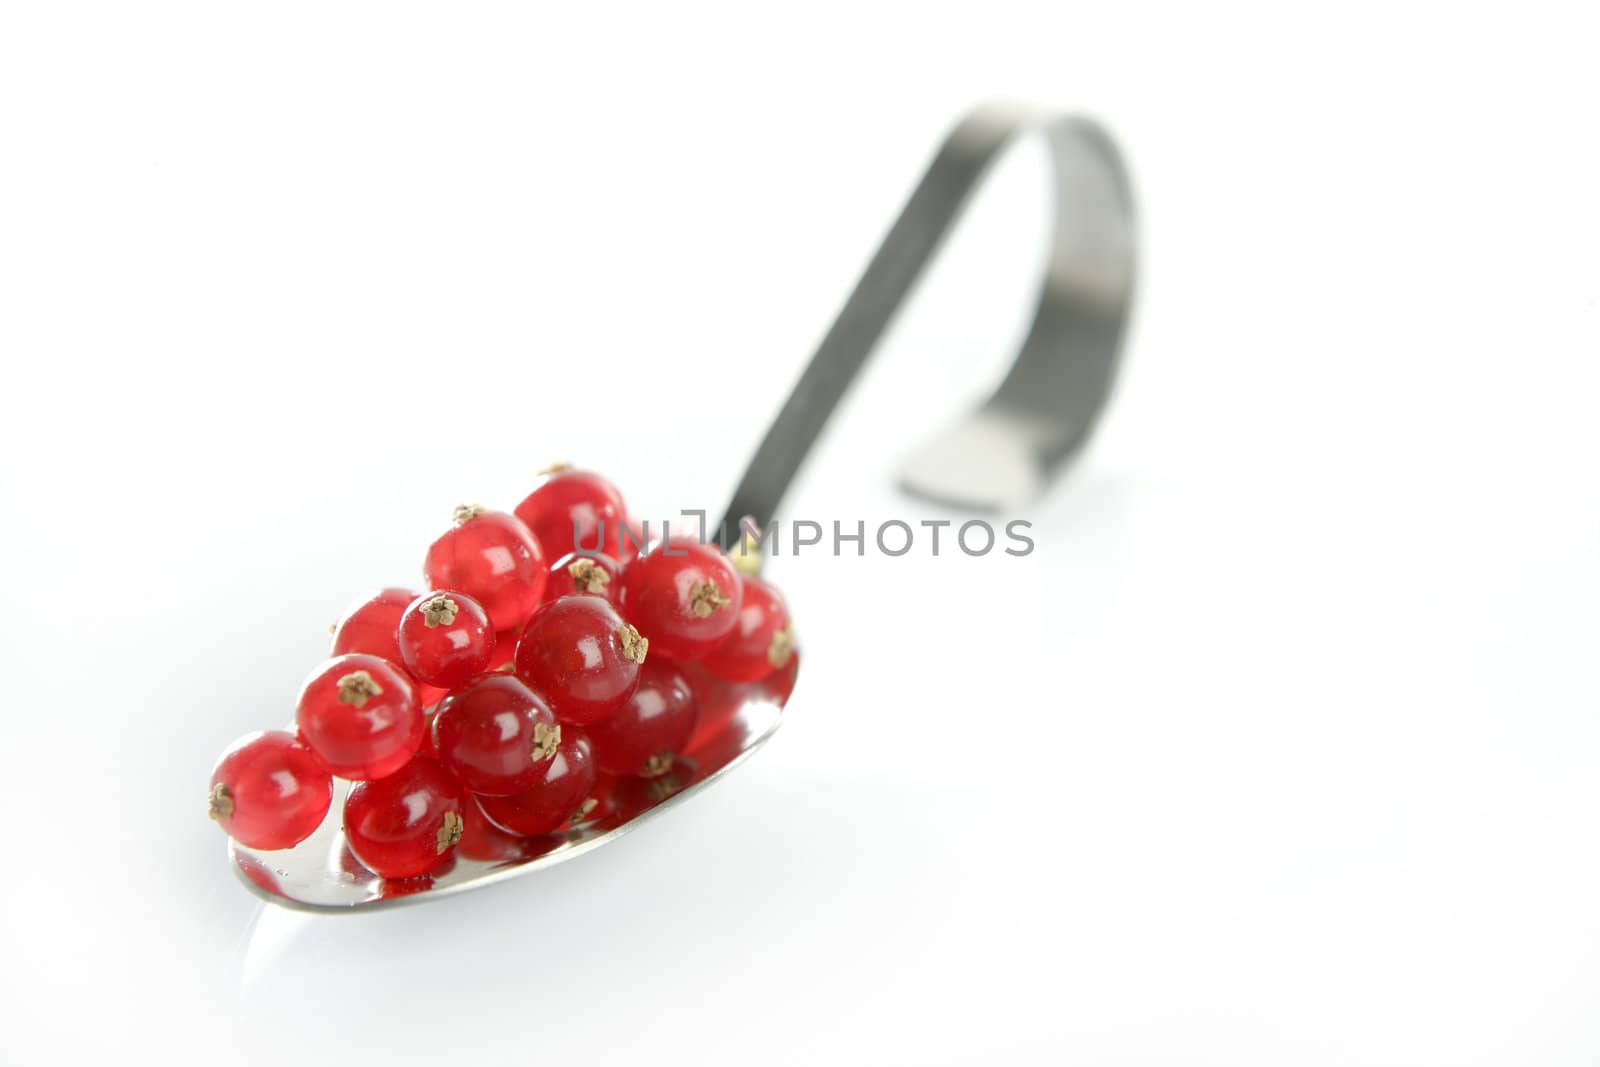 Redcurrant berries in a curved spoon in white background